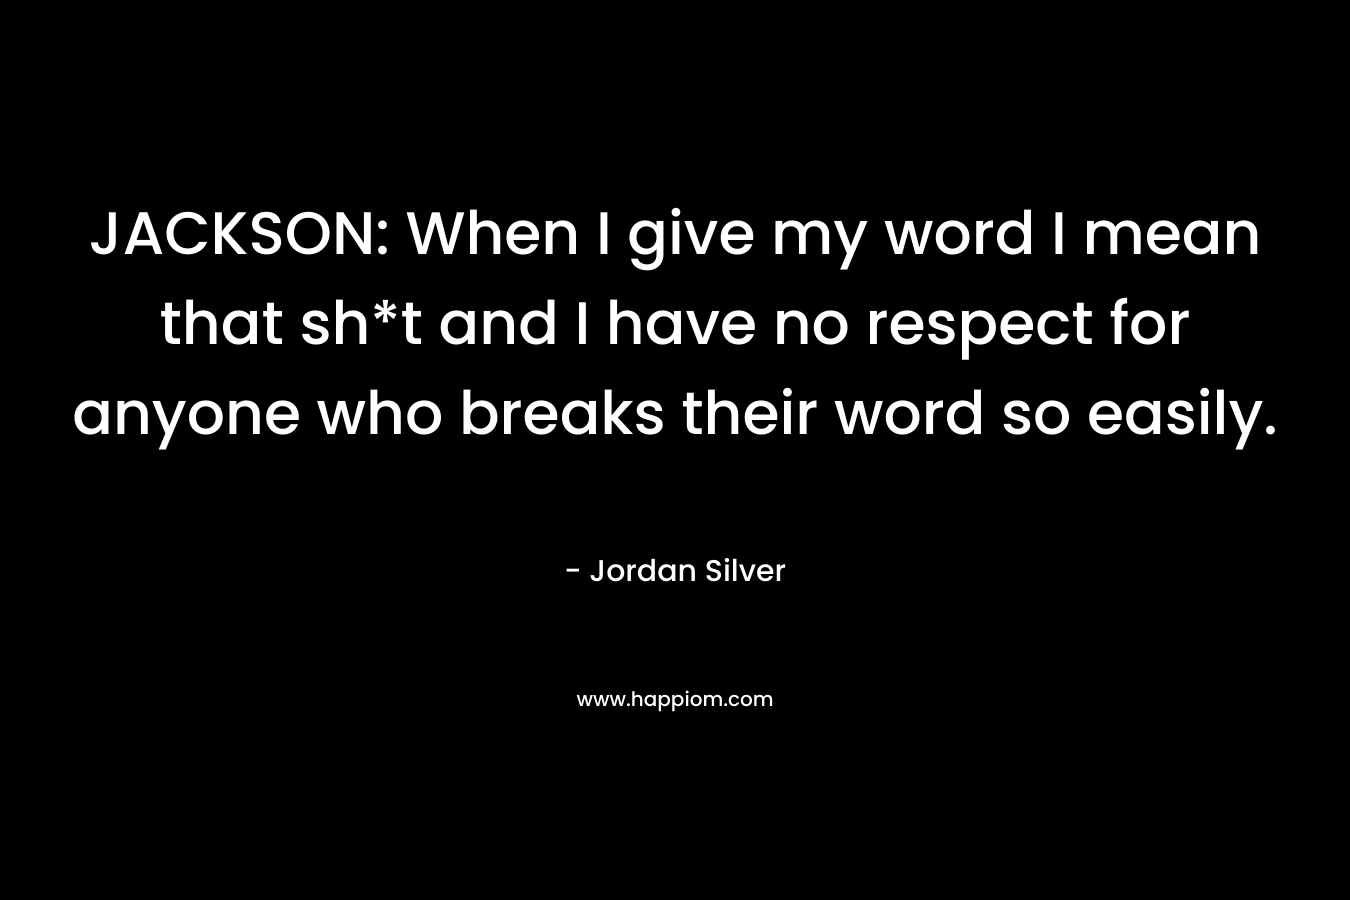 JACKSON: When I give my word I mean that sh*t and I have no respect for anyone who breaks their word so easily.